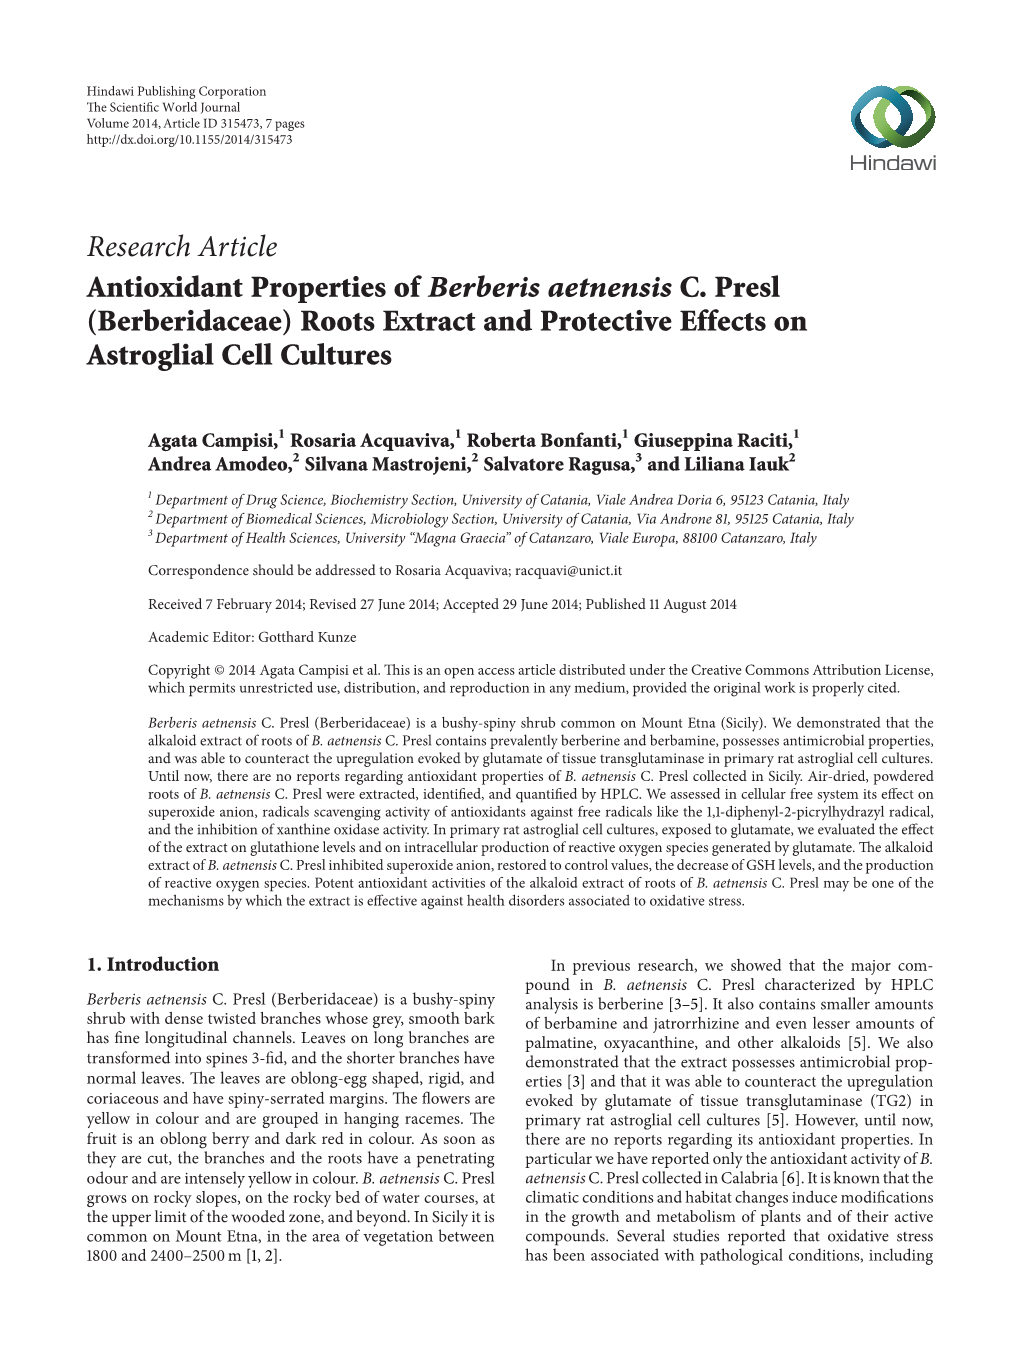 Antioxidant Properties of Berberis Aetnensis C. Presl (Berberidaceae) Roots Extract and Protective Effects on Astroglial Cell Cultures